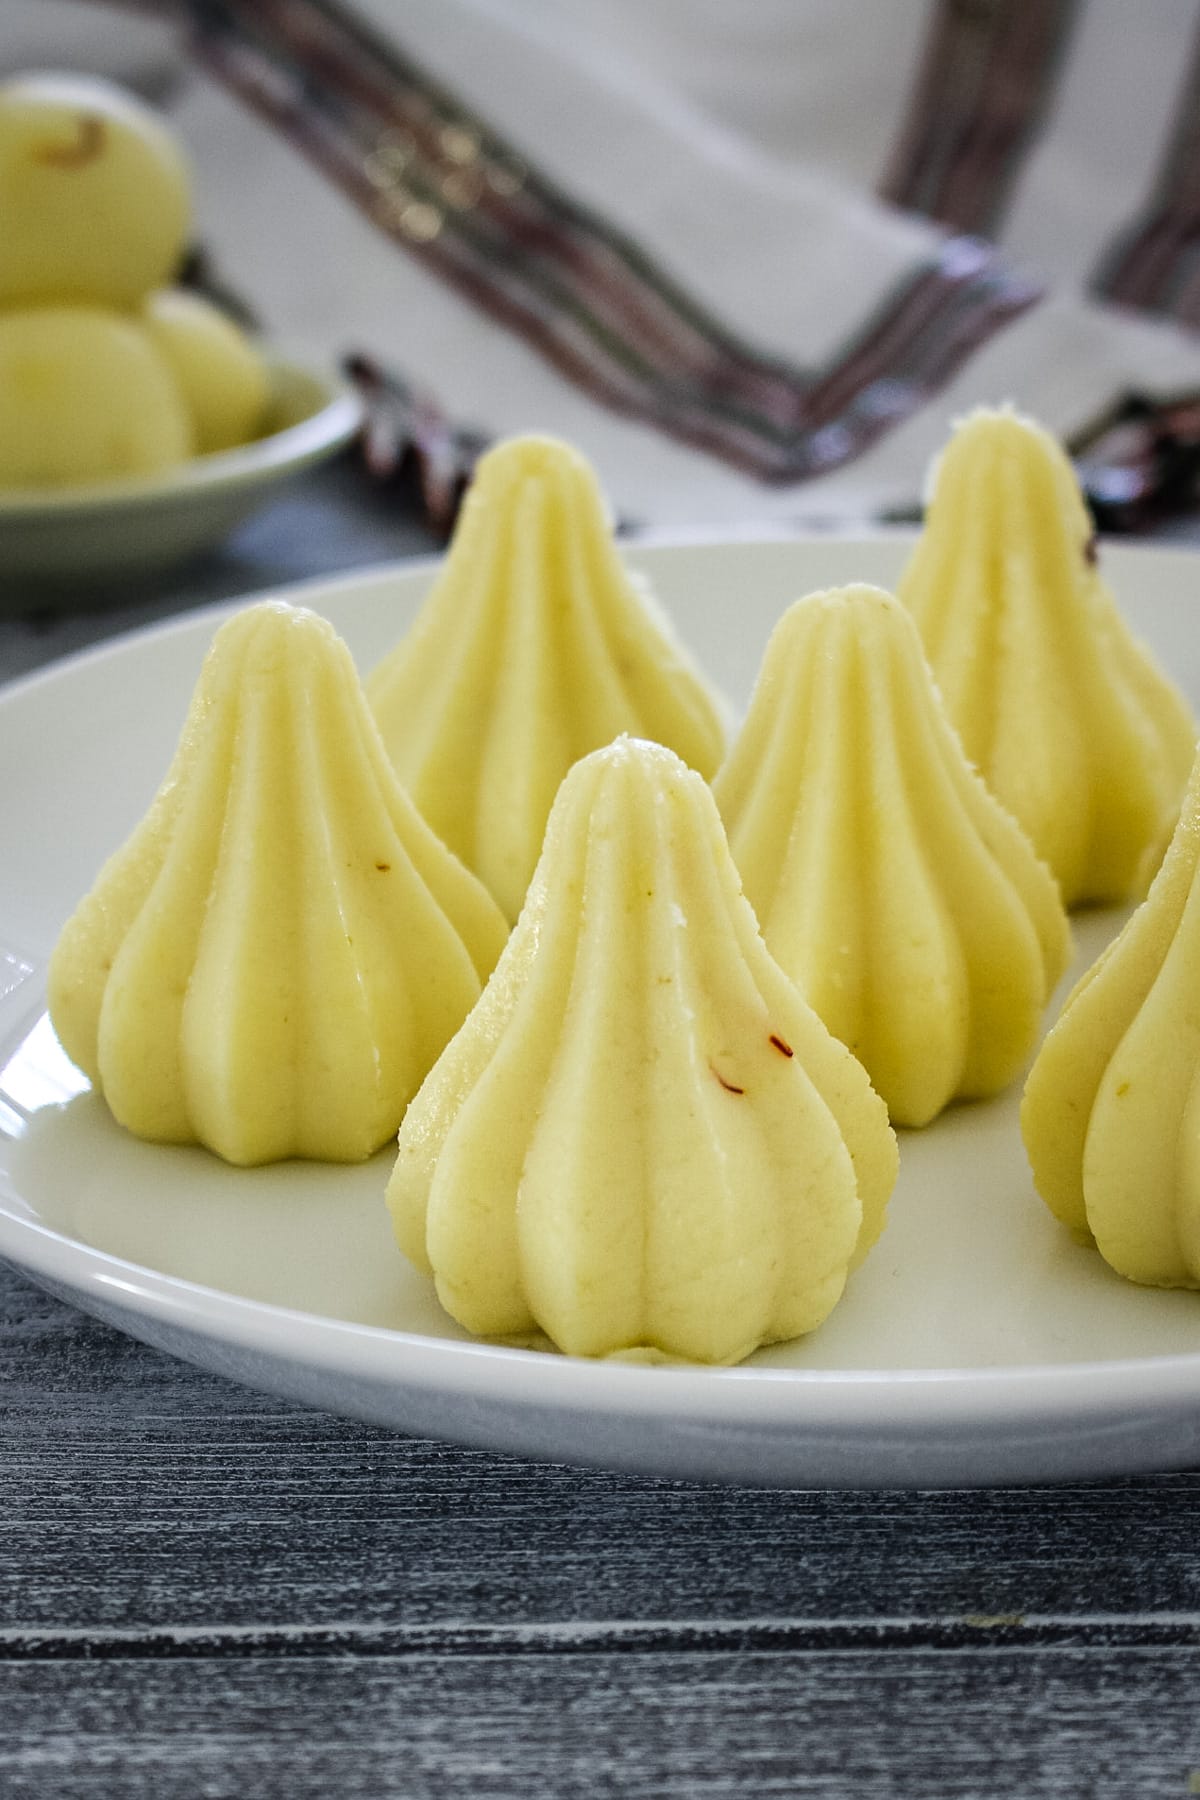 5 malai modak arranged on a plate with ladoo on the back side